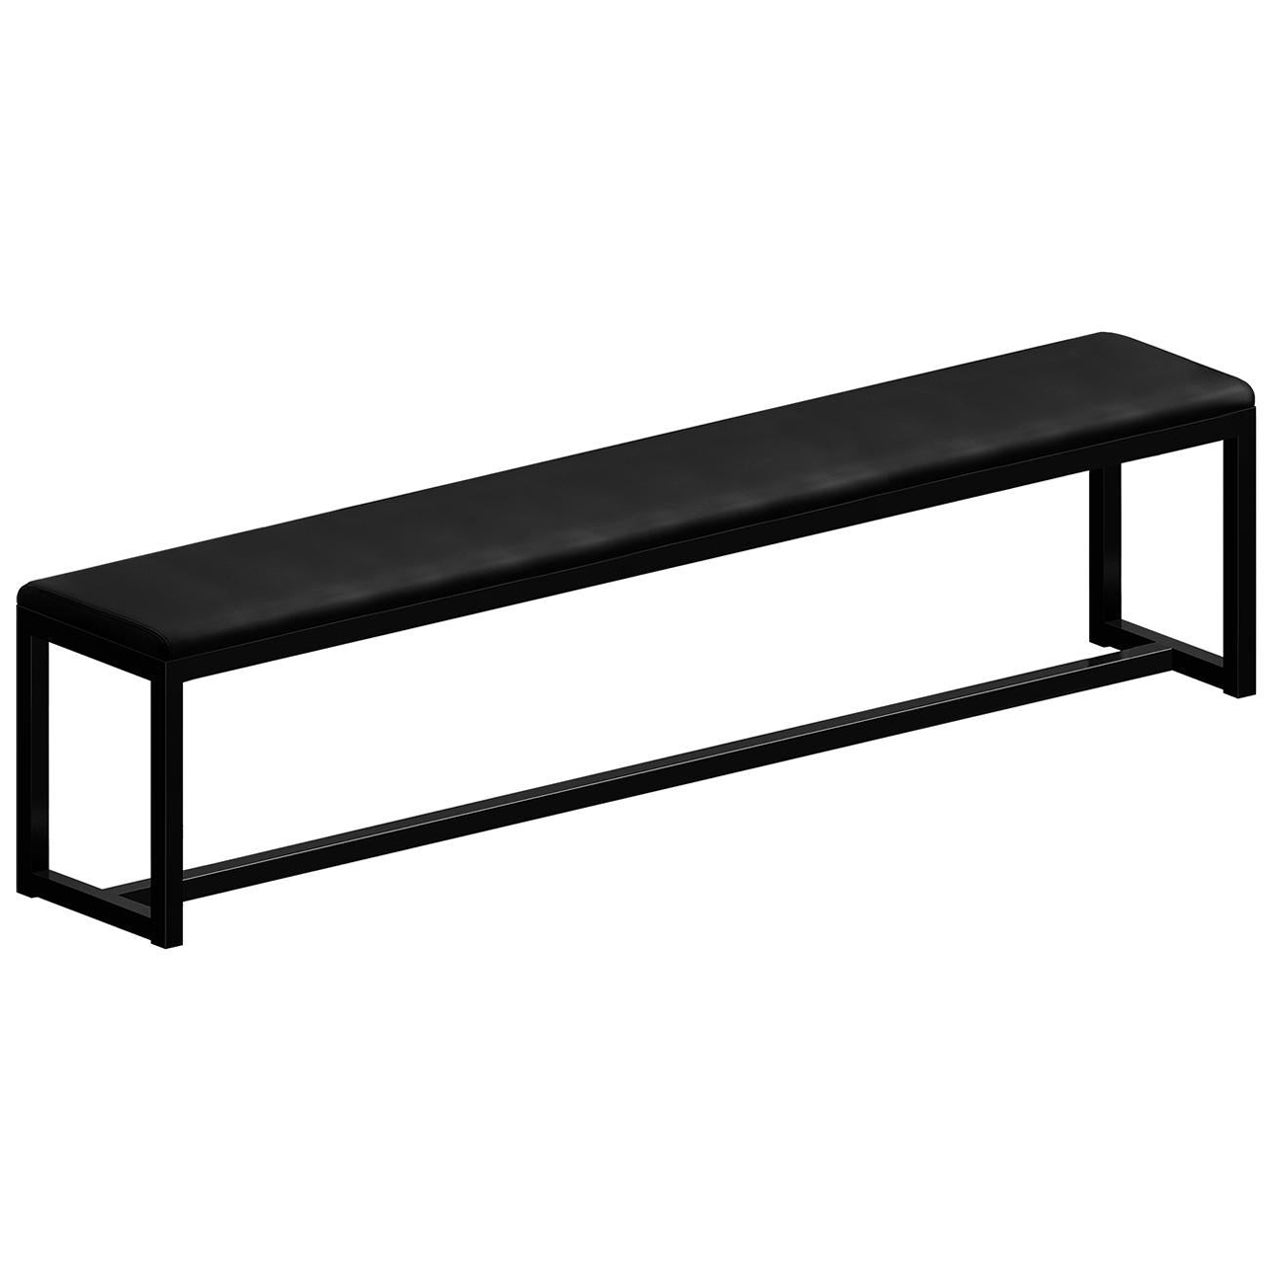 Big Brother Large Black Bench by Maurizio Peregalli